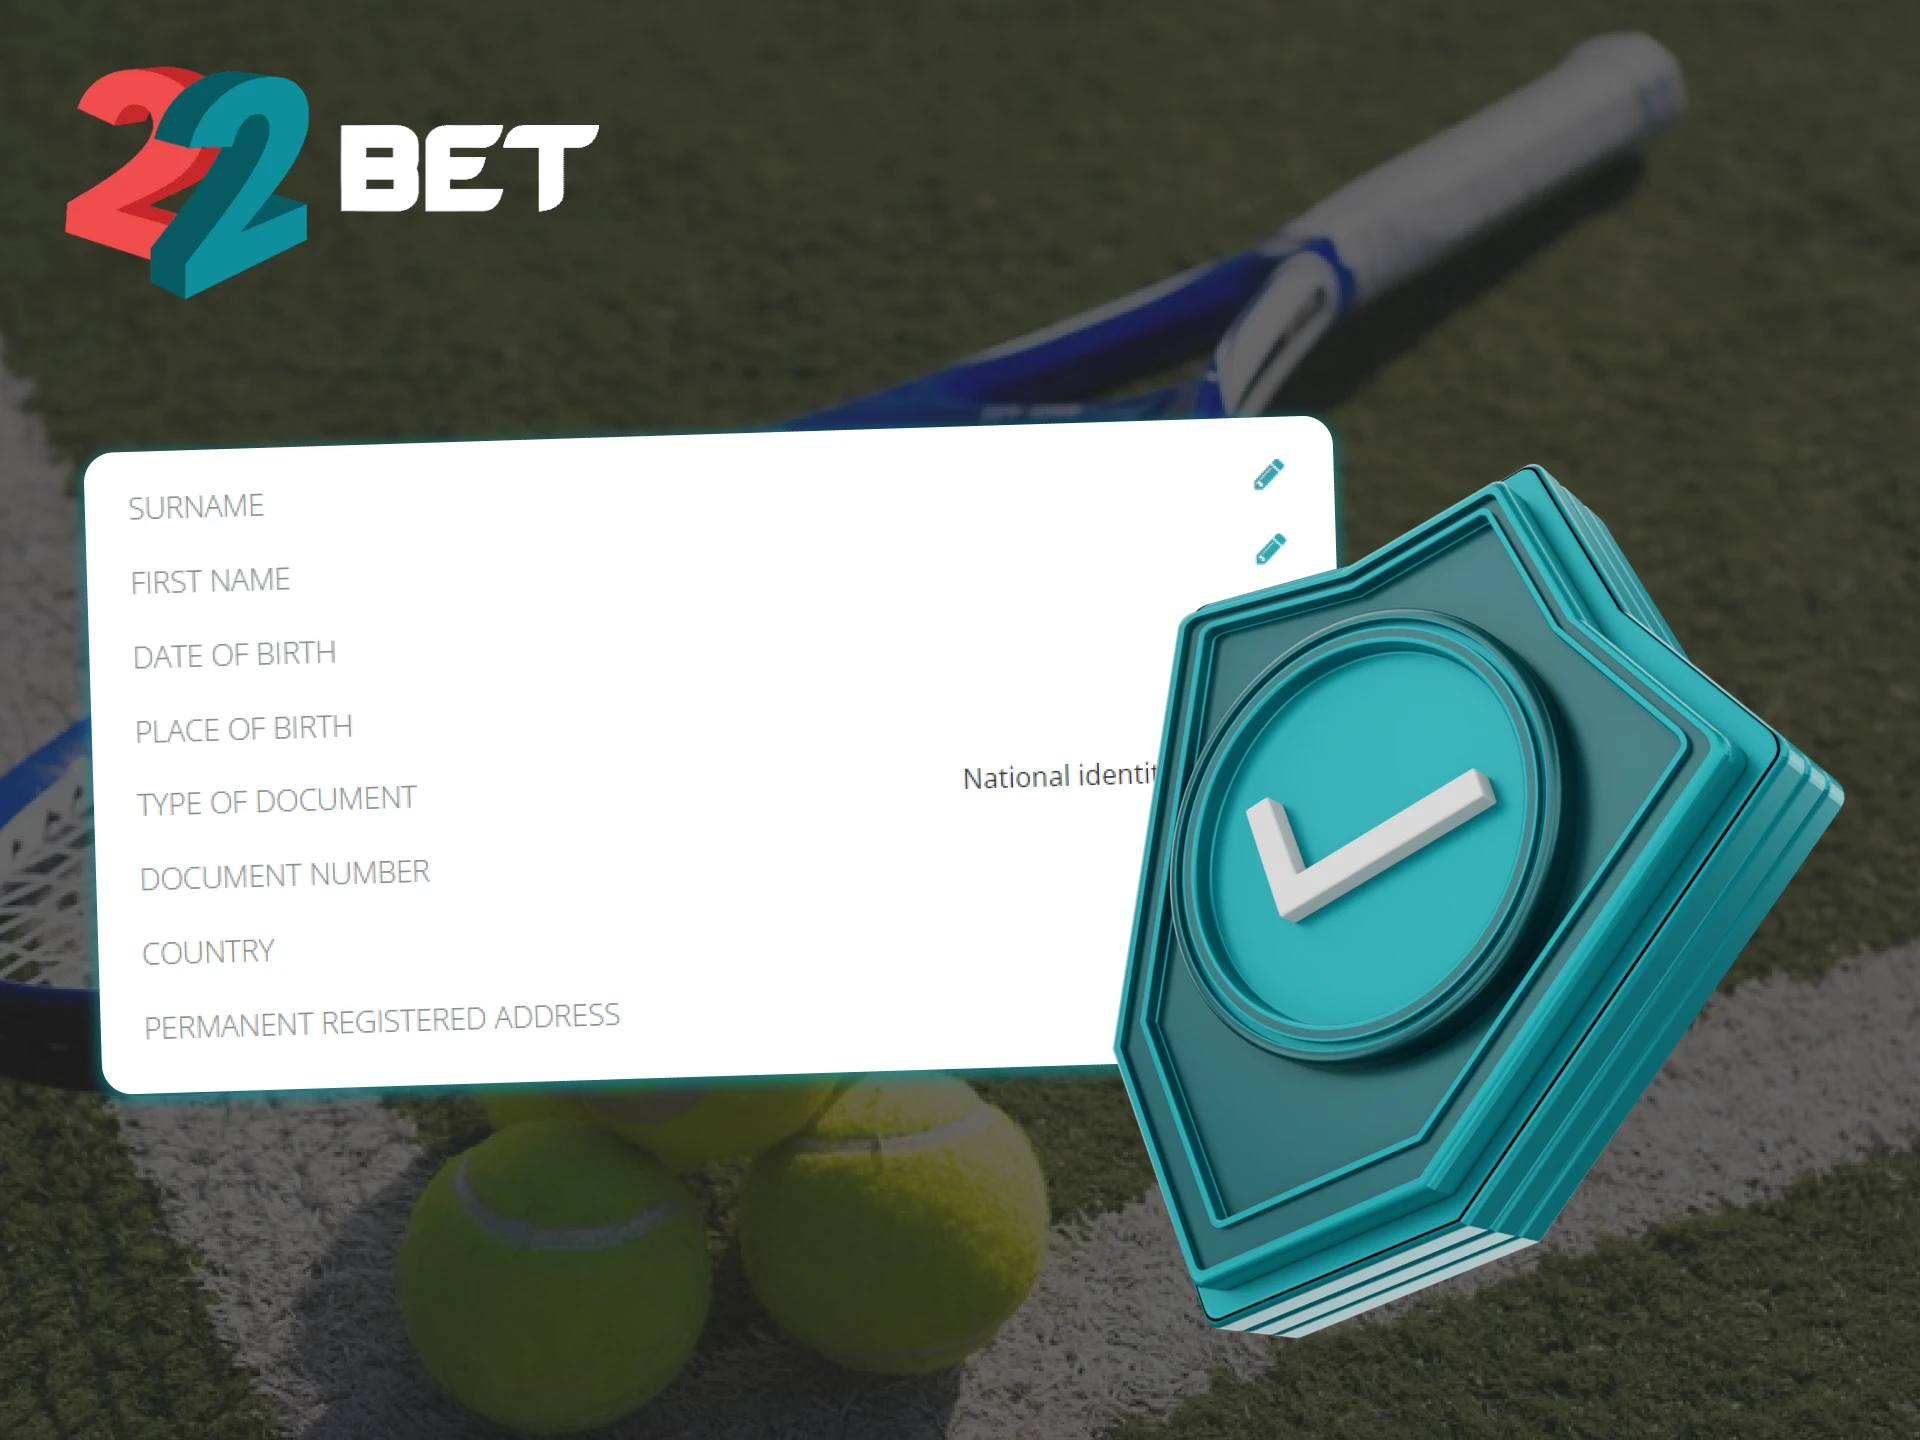 To be able to place bets and play casino games at 22Bet, you will need to verify your account.